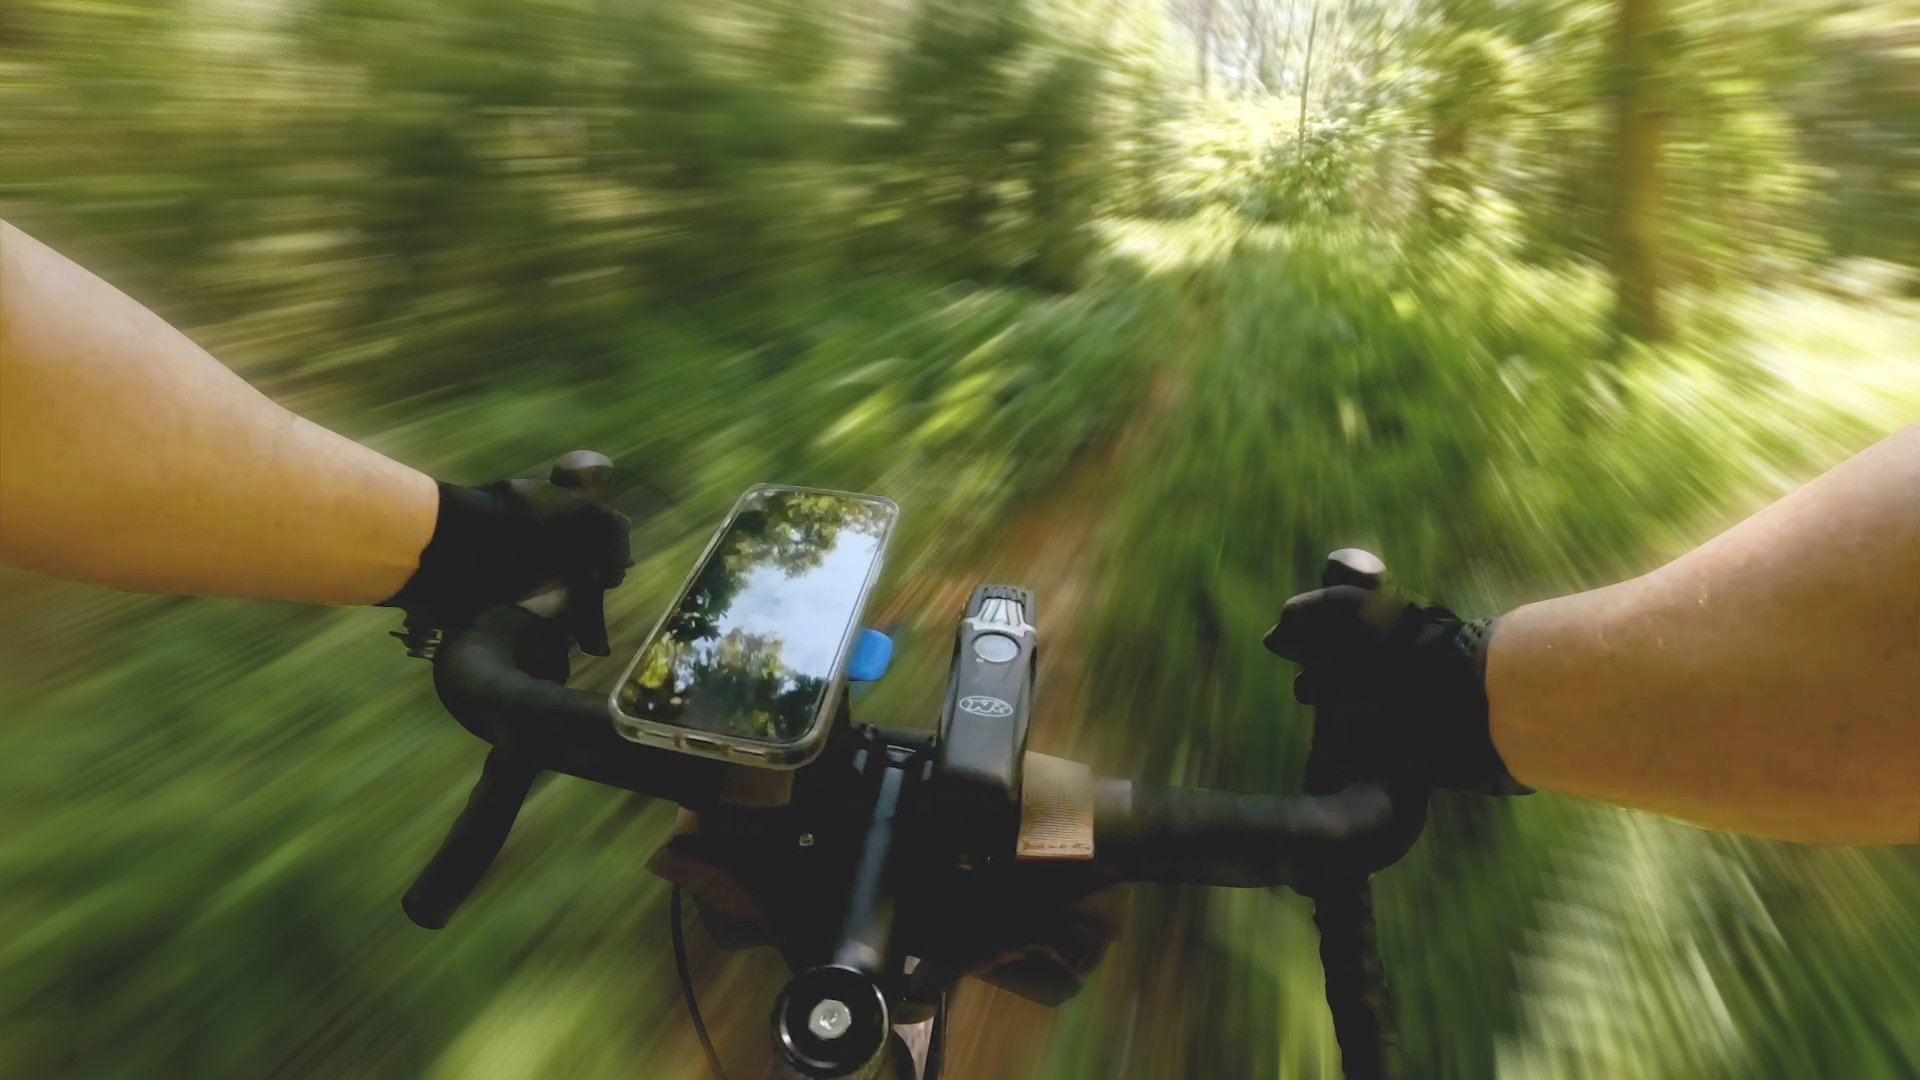 A first person point of view of hands on bicycle handlebars riding through blurry forest